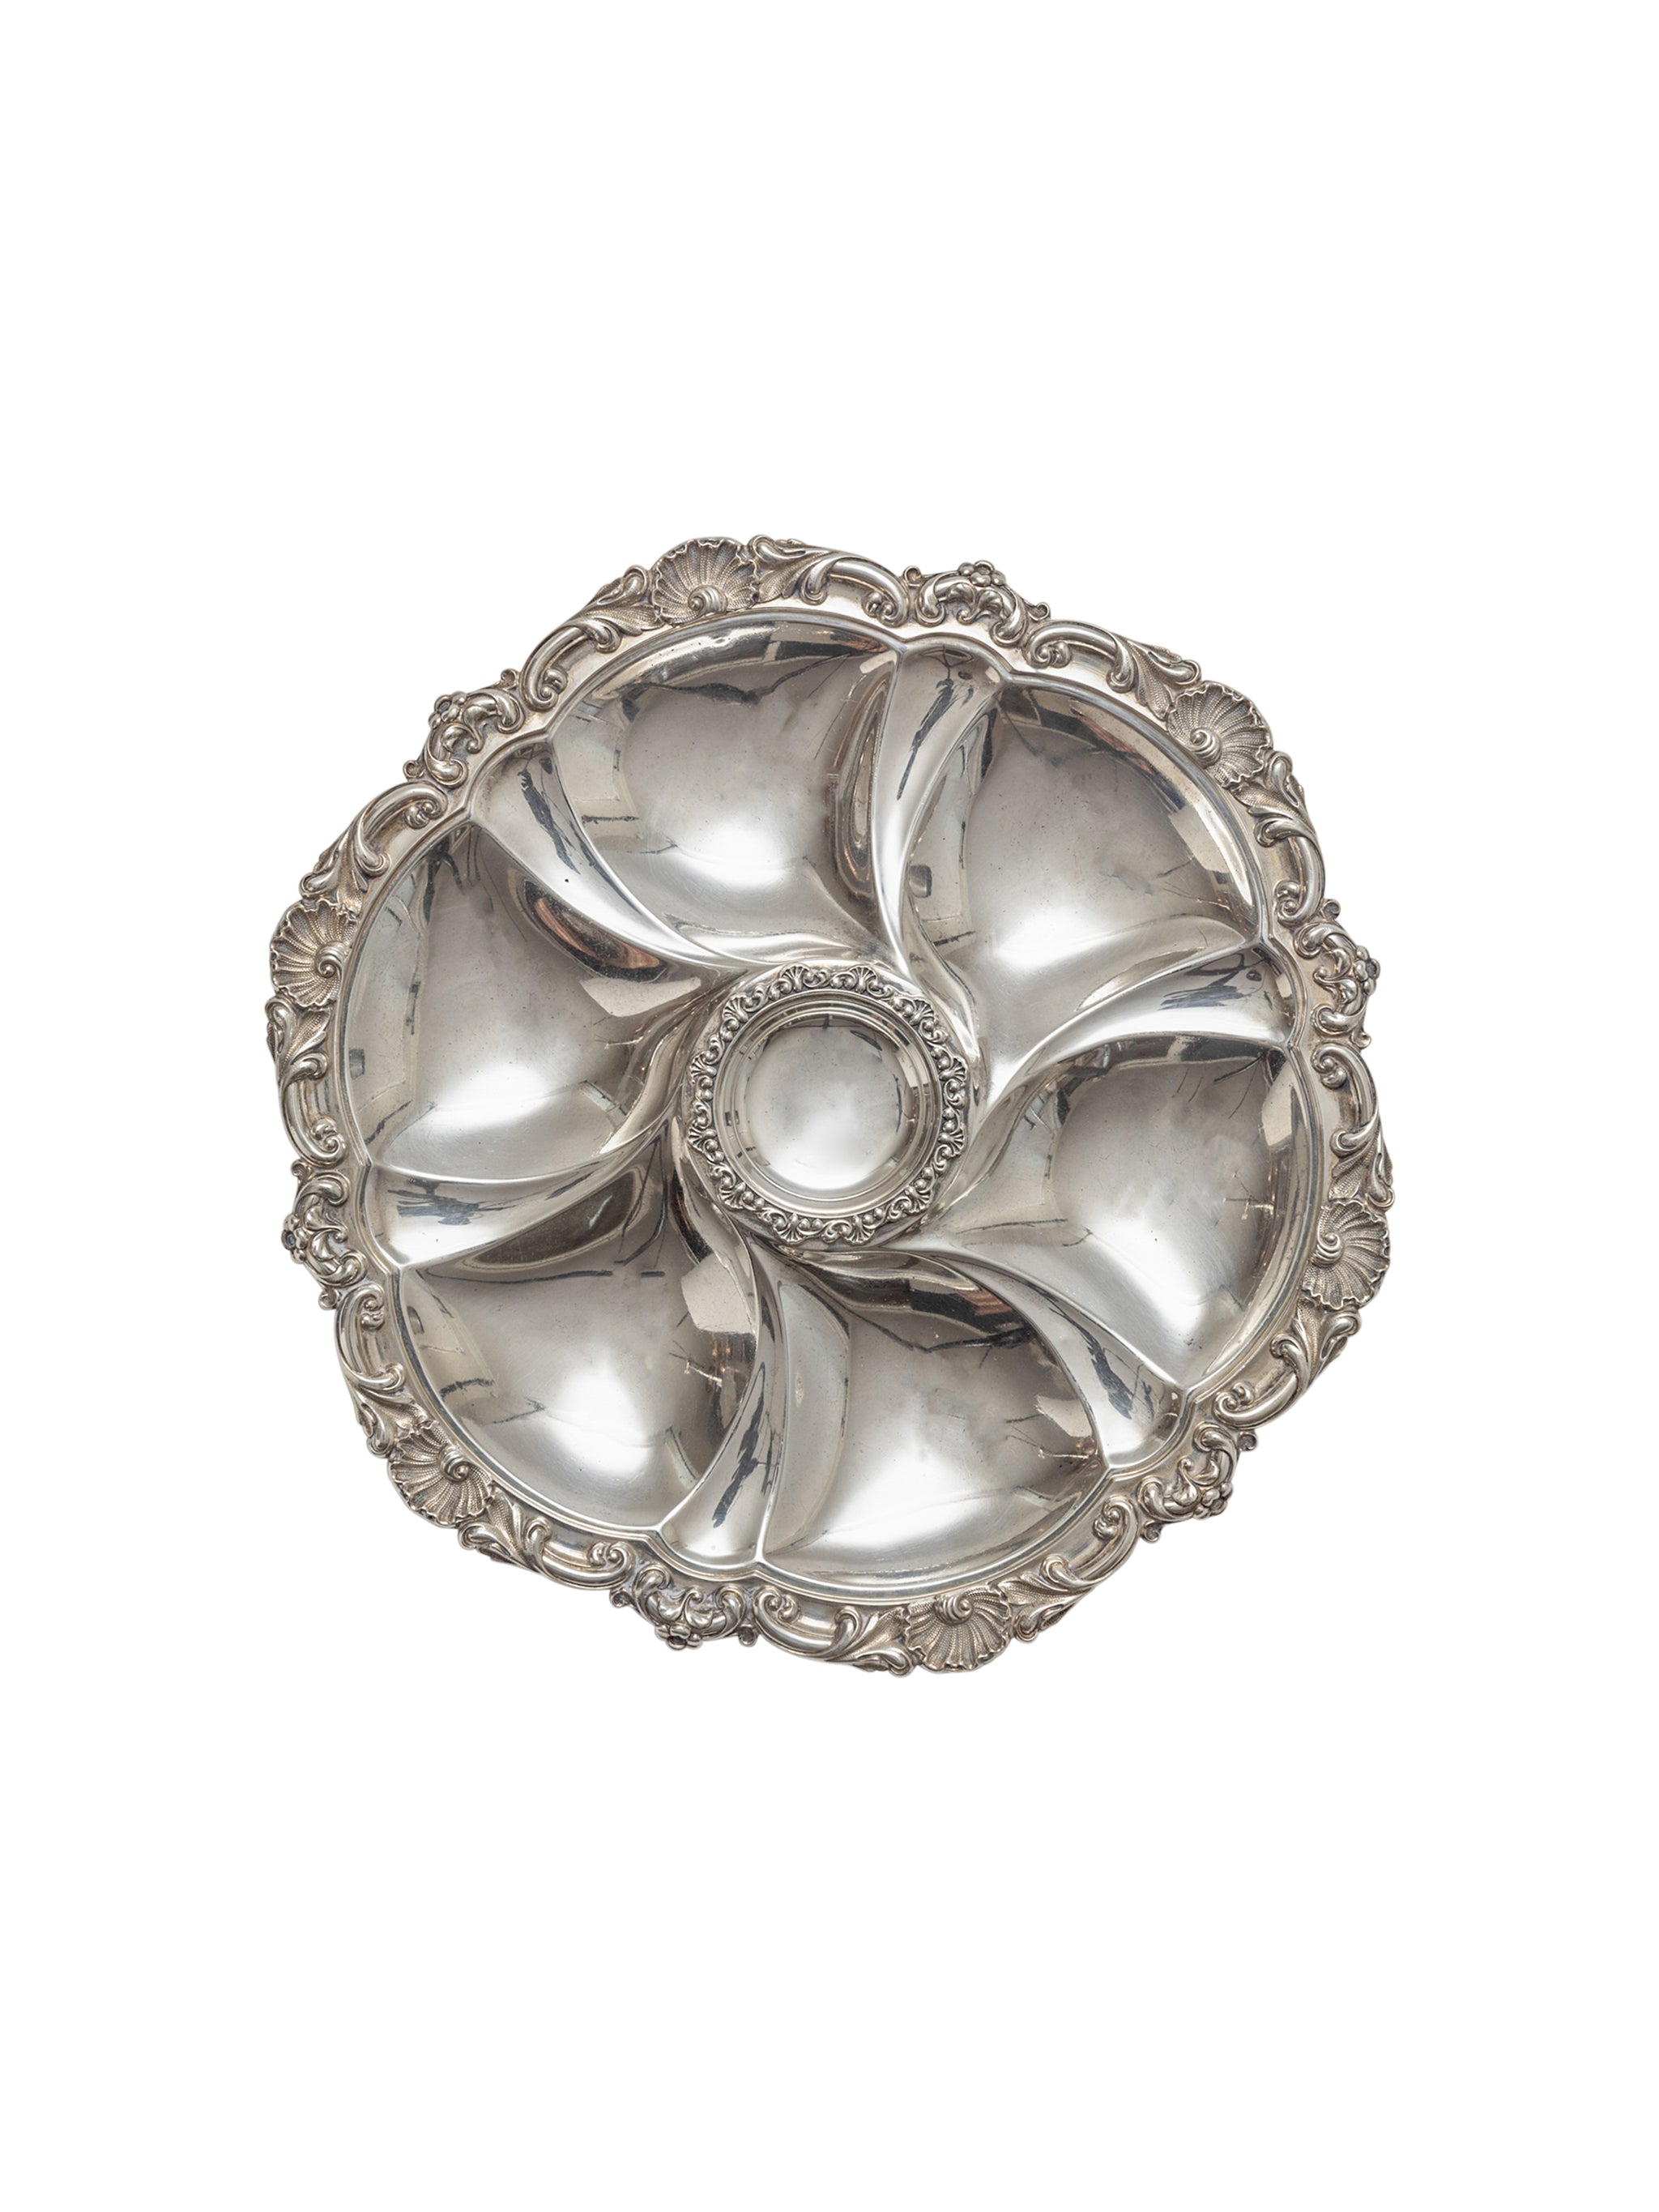 Shop the Vintage 19th Century Sterling Silver Oyster Plate at